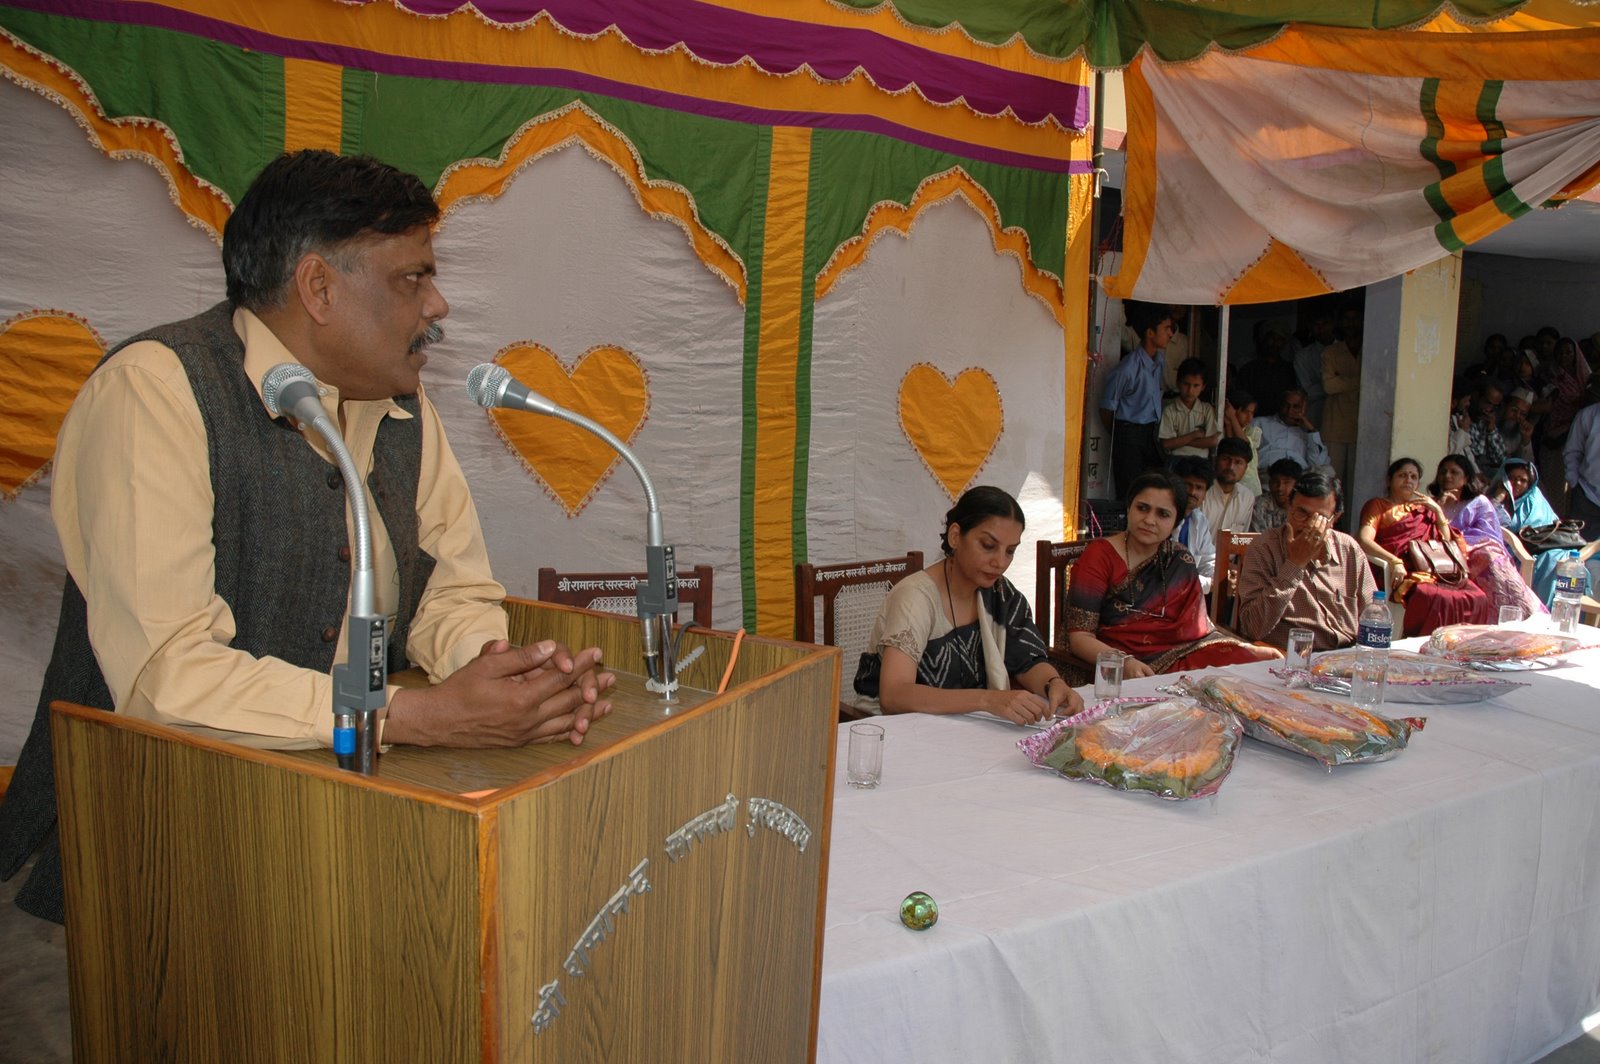 Vibhuti Narain Rai addressing a gathering in the library established by him in his village